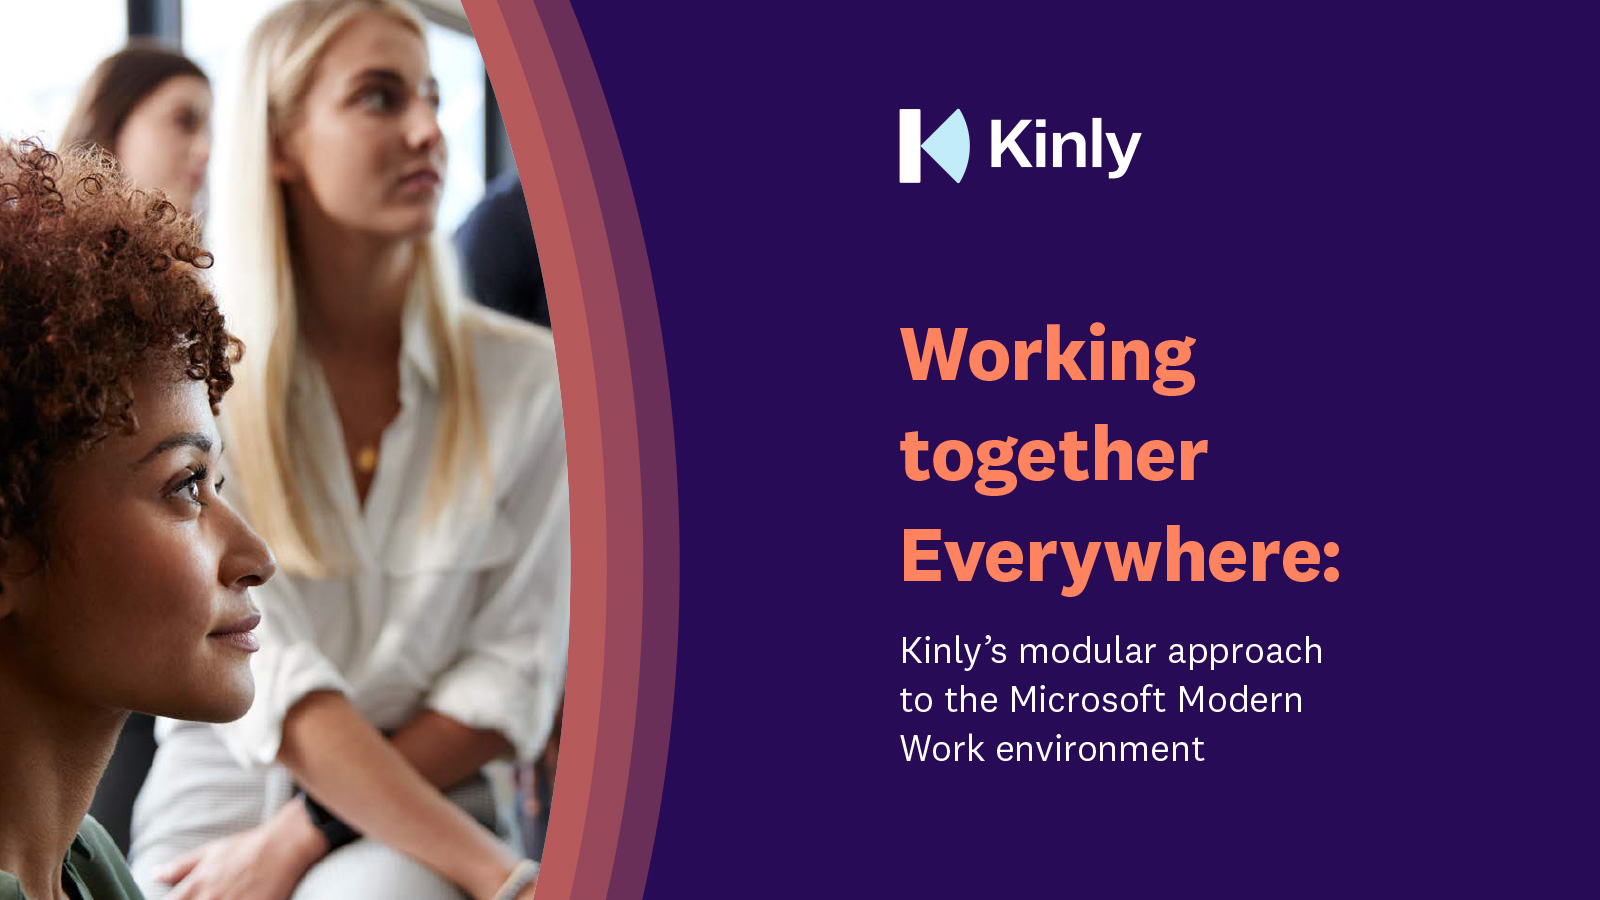 Kinly’s modular approach to the Microsoft Modern Work environment